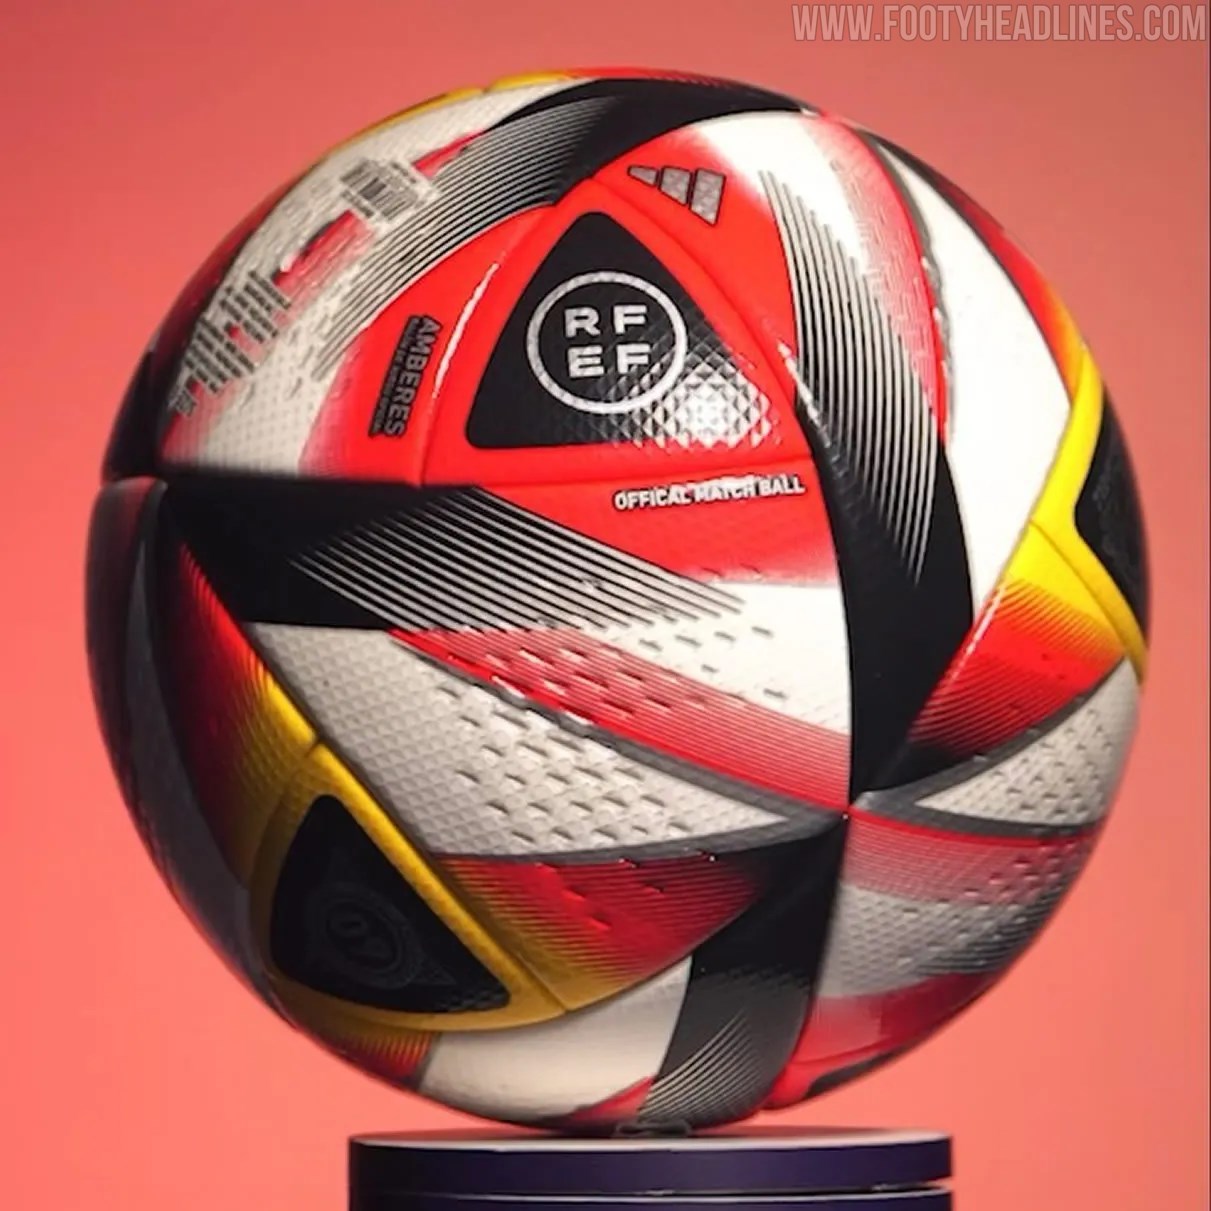 Adidas 2324 Copa del Rey & Spanish Super Cup Ball Released Footy